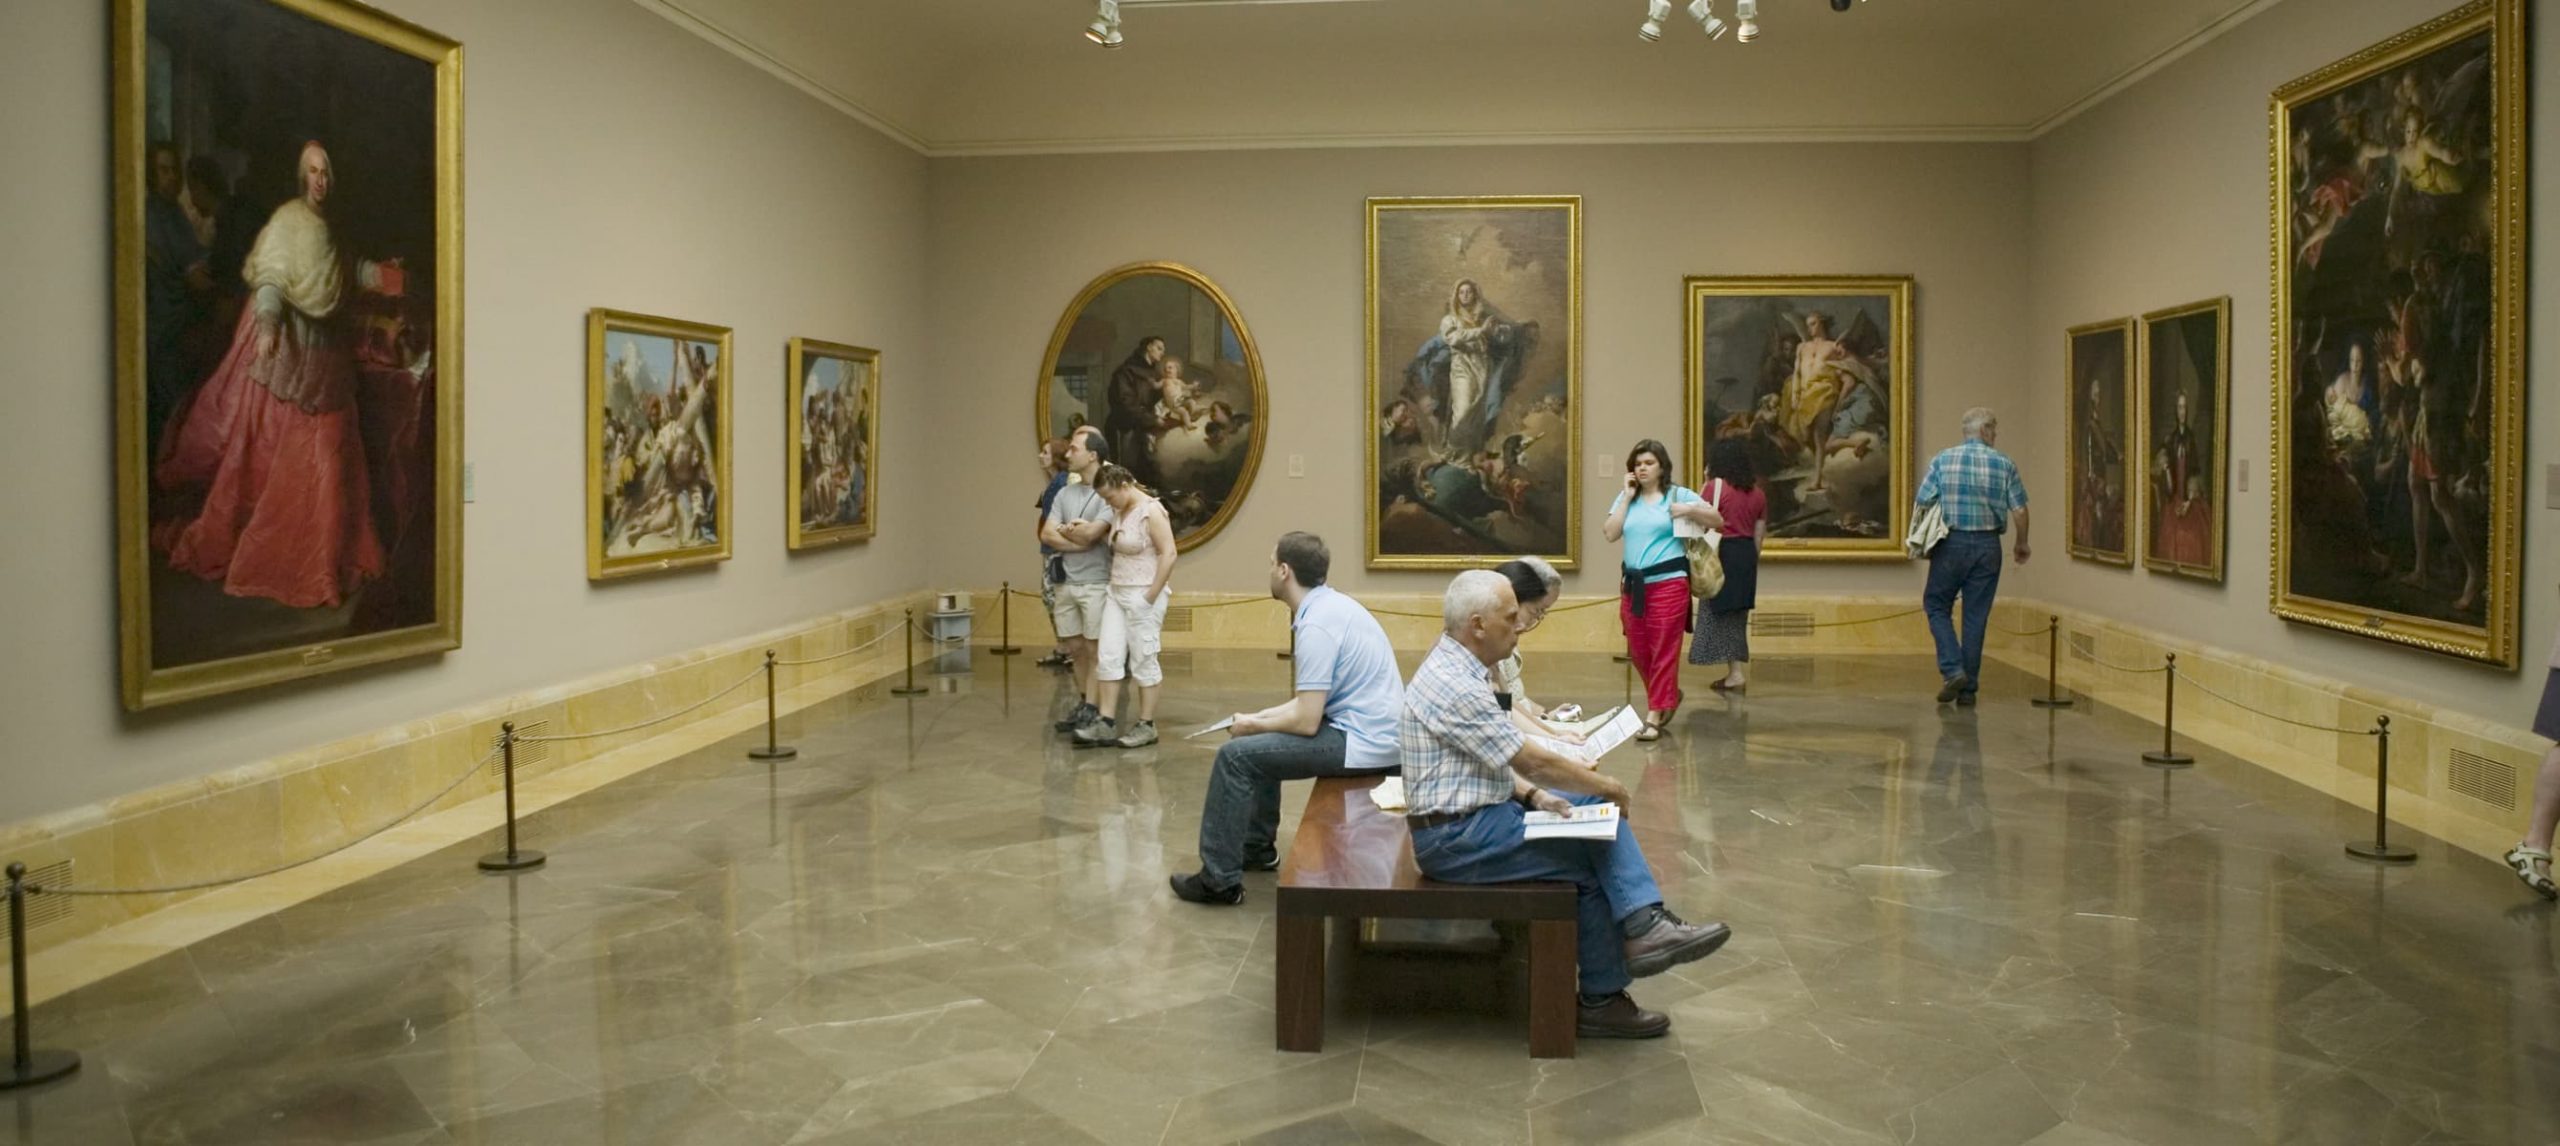 A Guide To The 10 Best Museums In Madrid, Spain